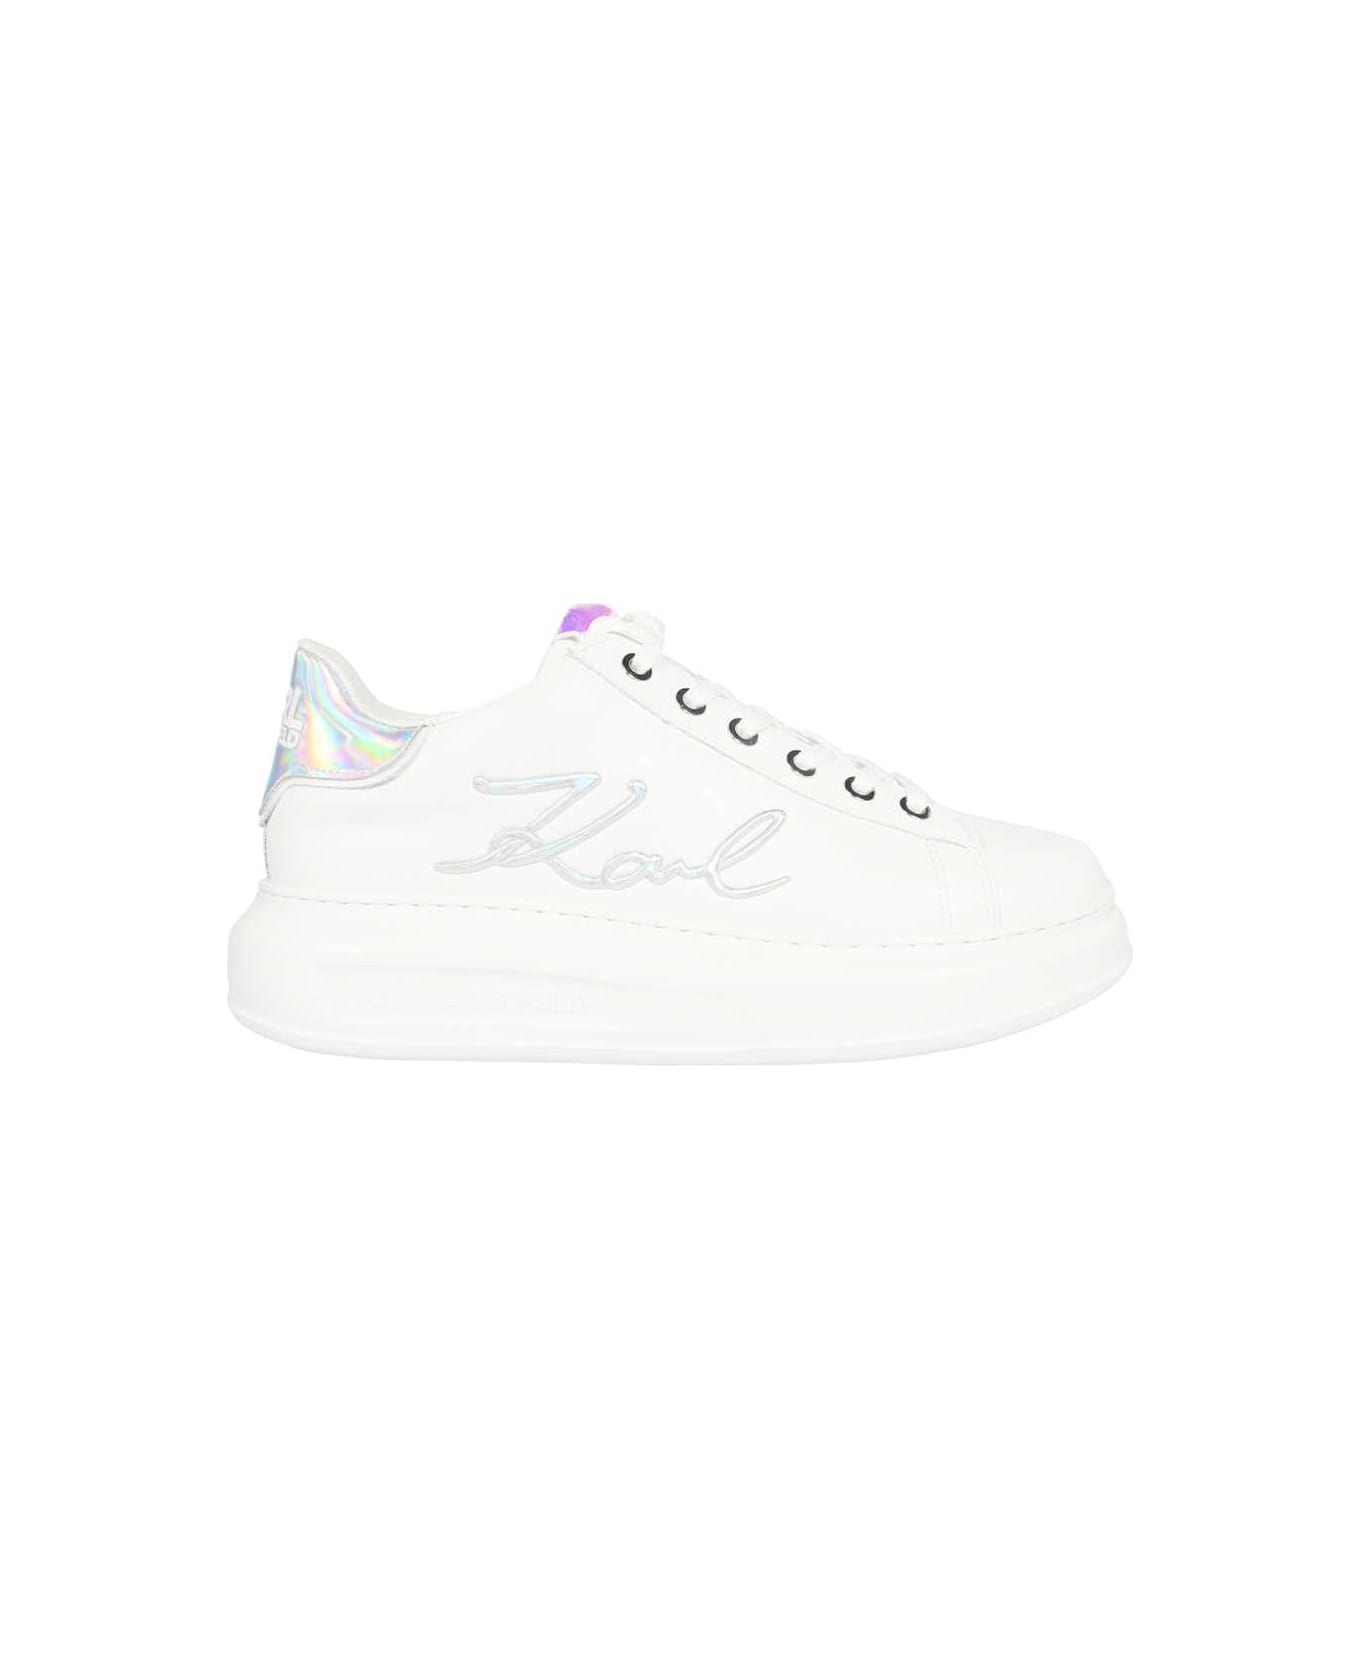 Karl Lagerfeld Low-top Sneakers - White ウェッジシューズ